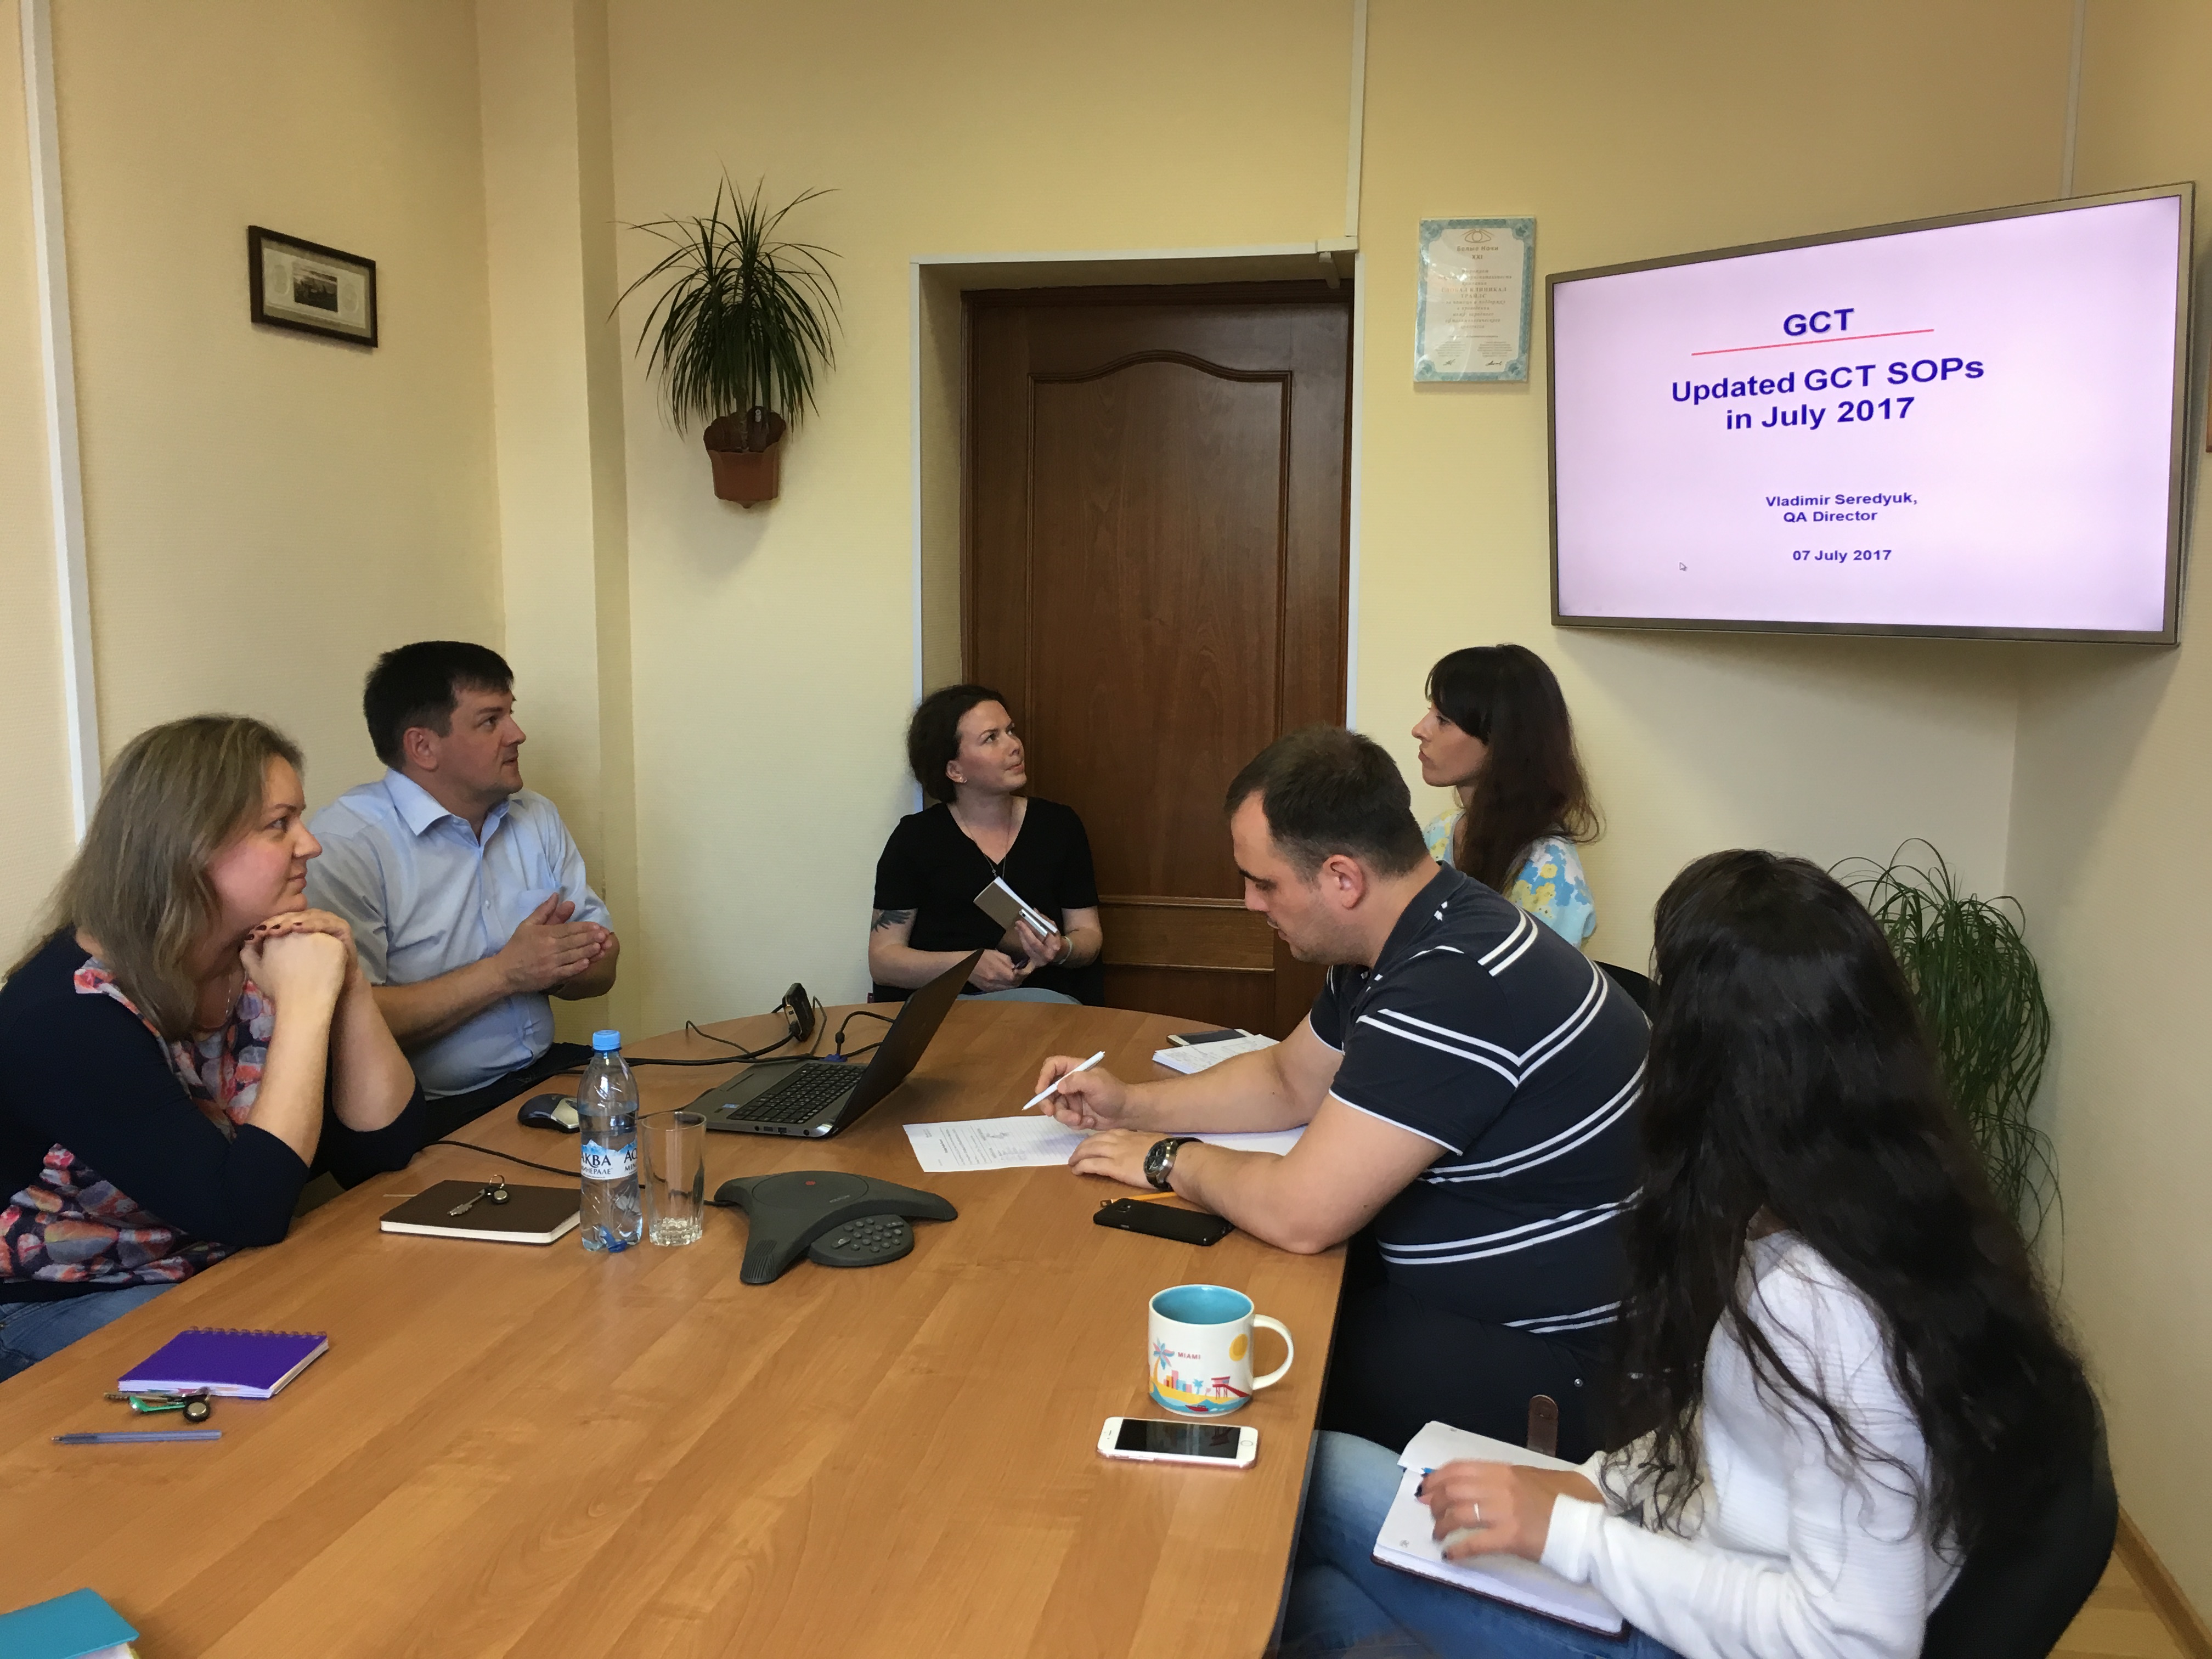 Vladimir Seredyuk, QA Director, conducted a training on the recent updates of GCT corporate SOPs at GCT Russian Office.